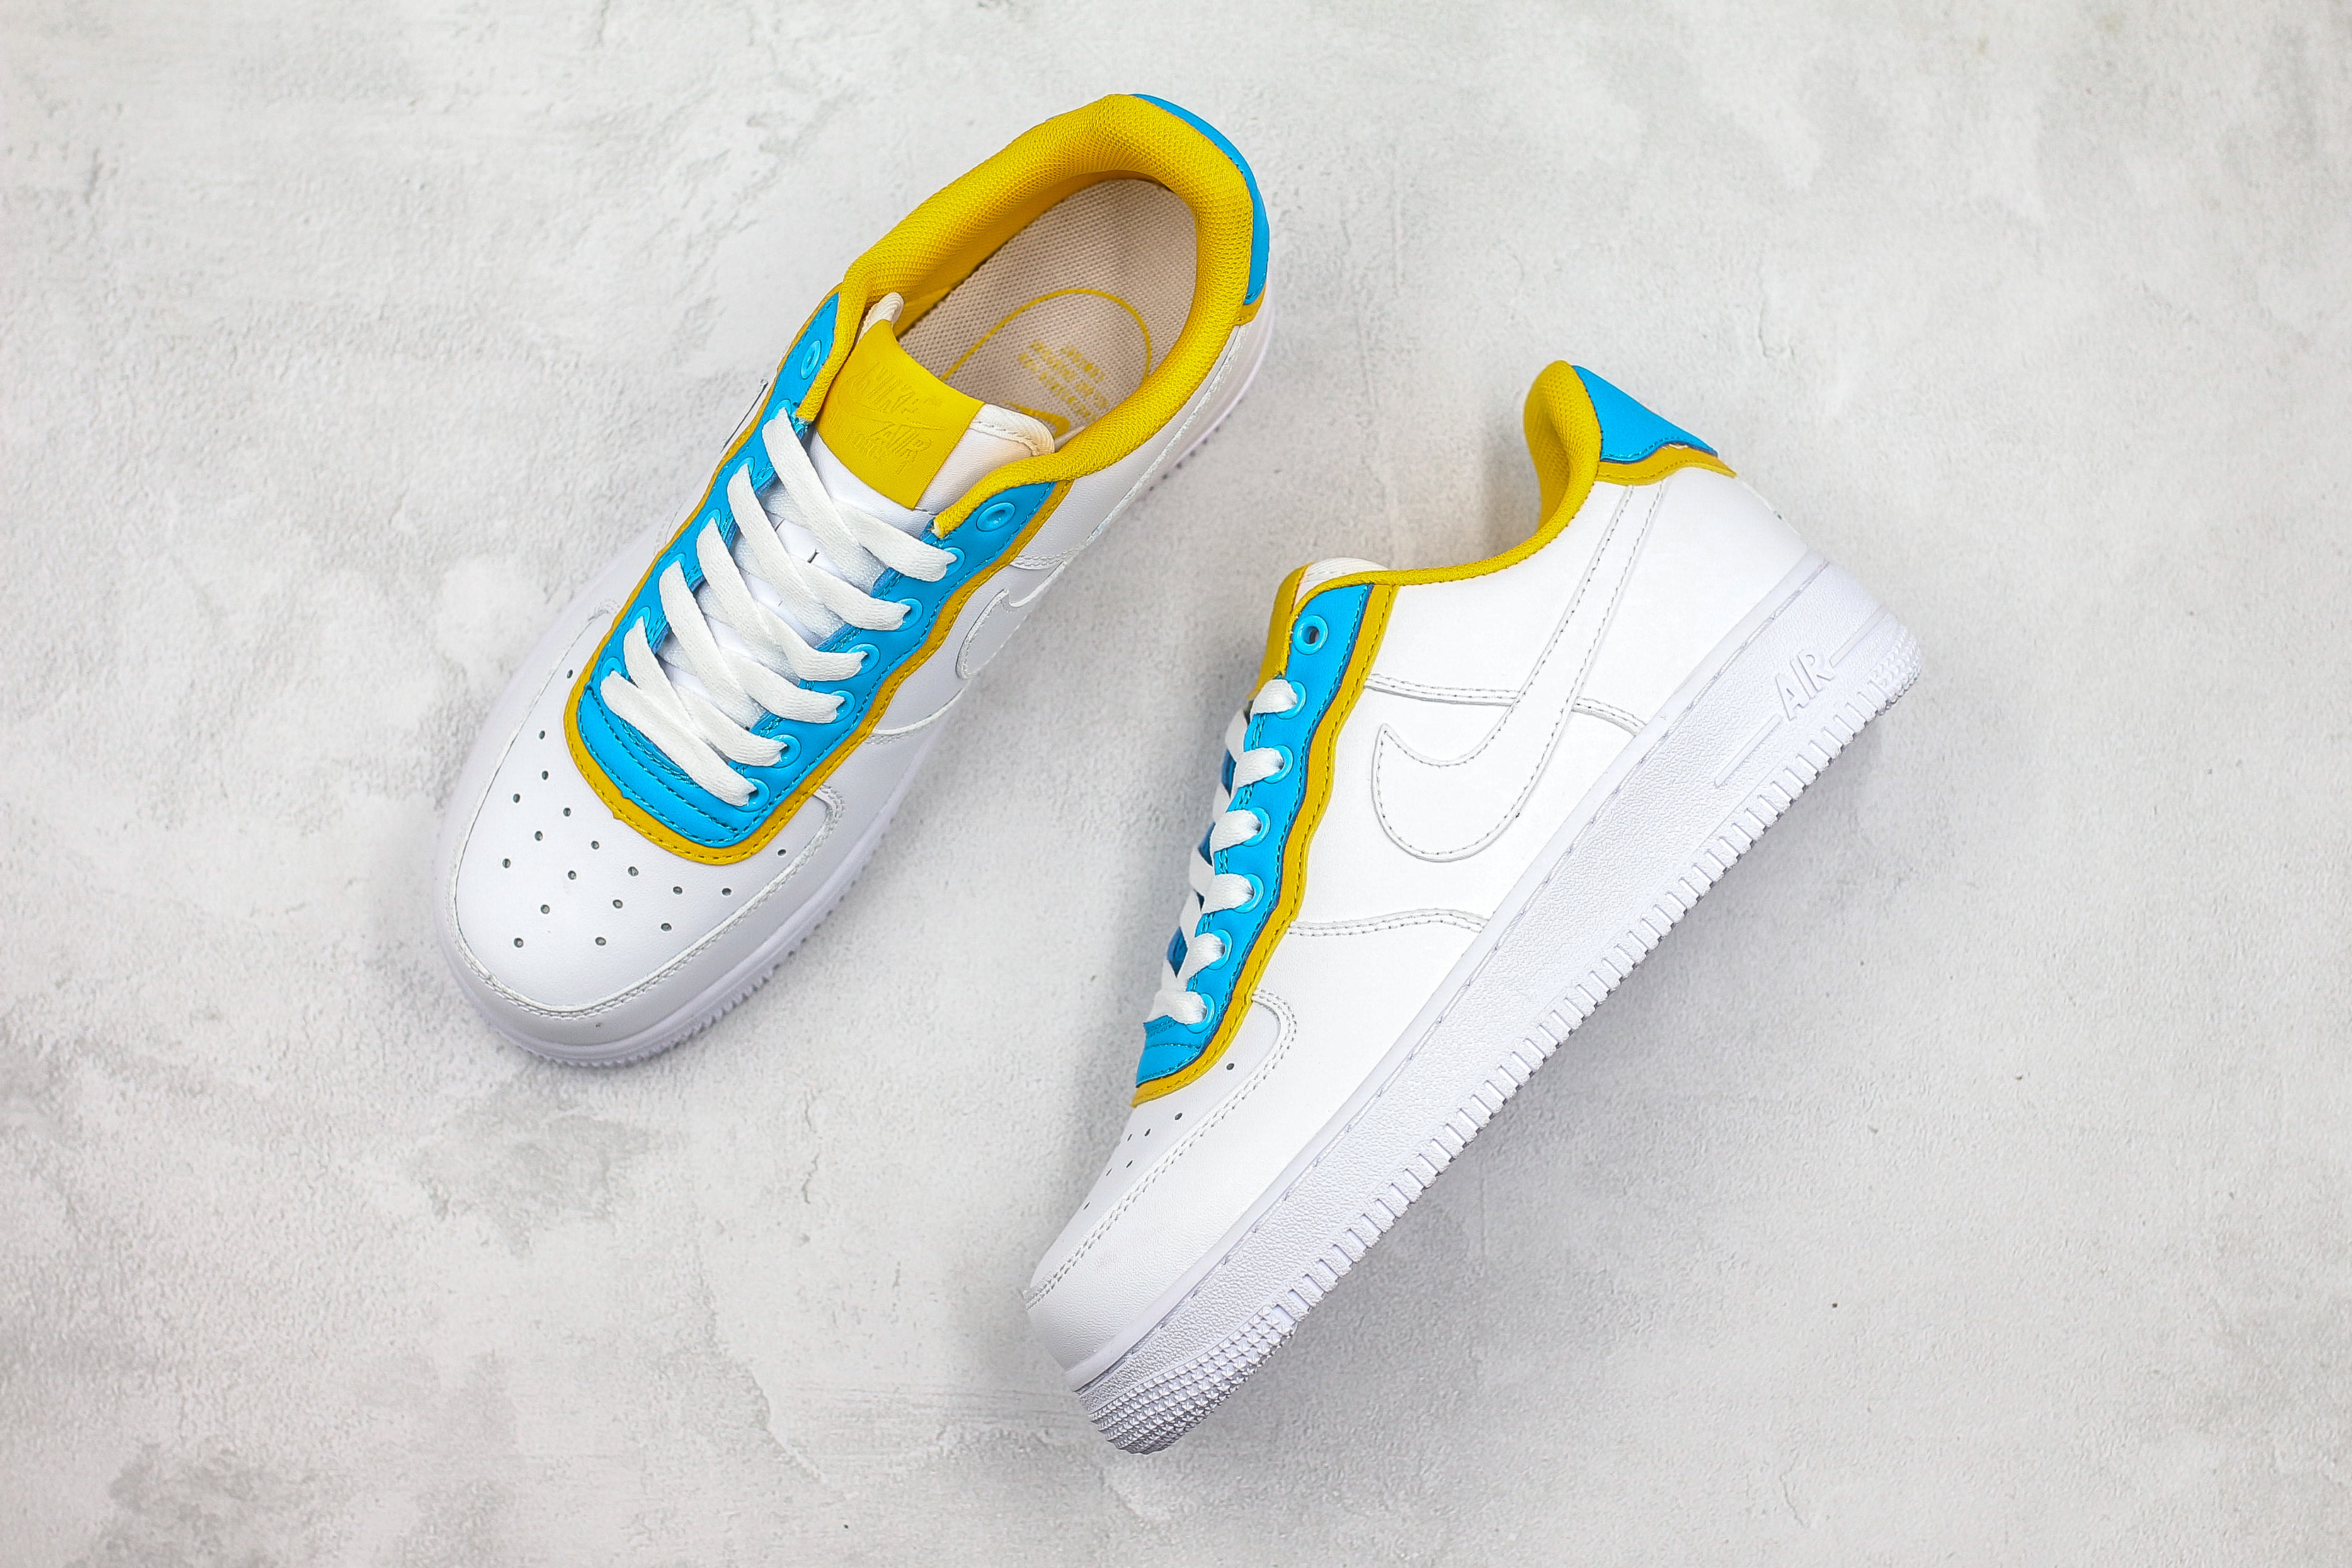 air force yellow and blue